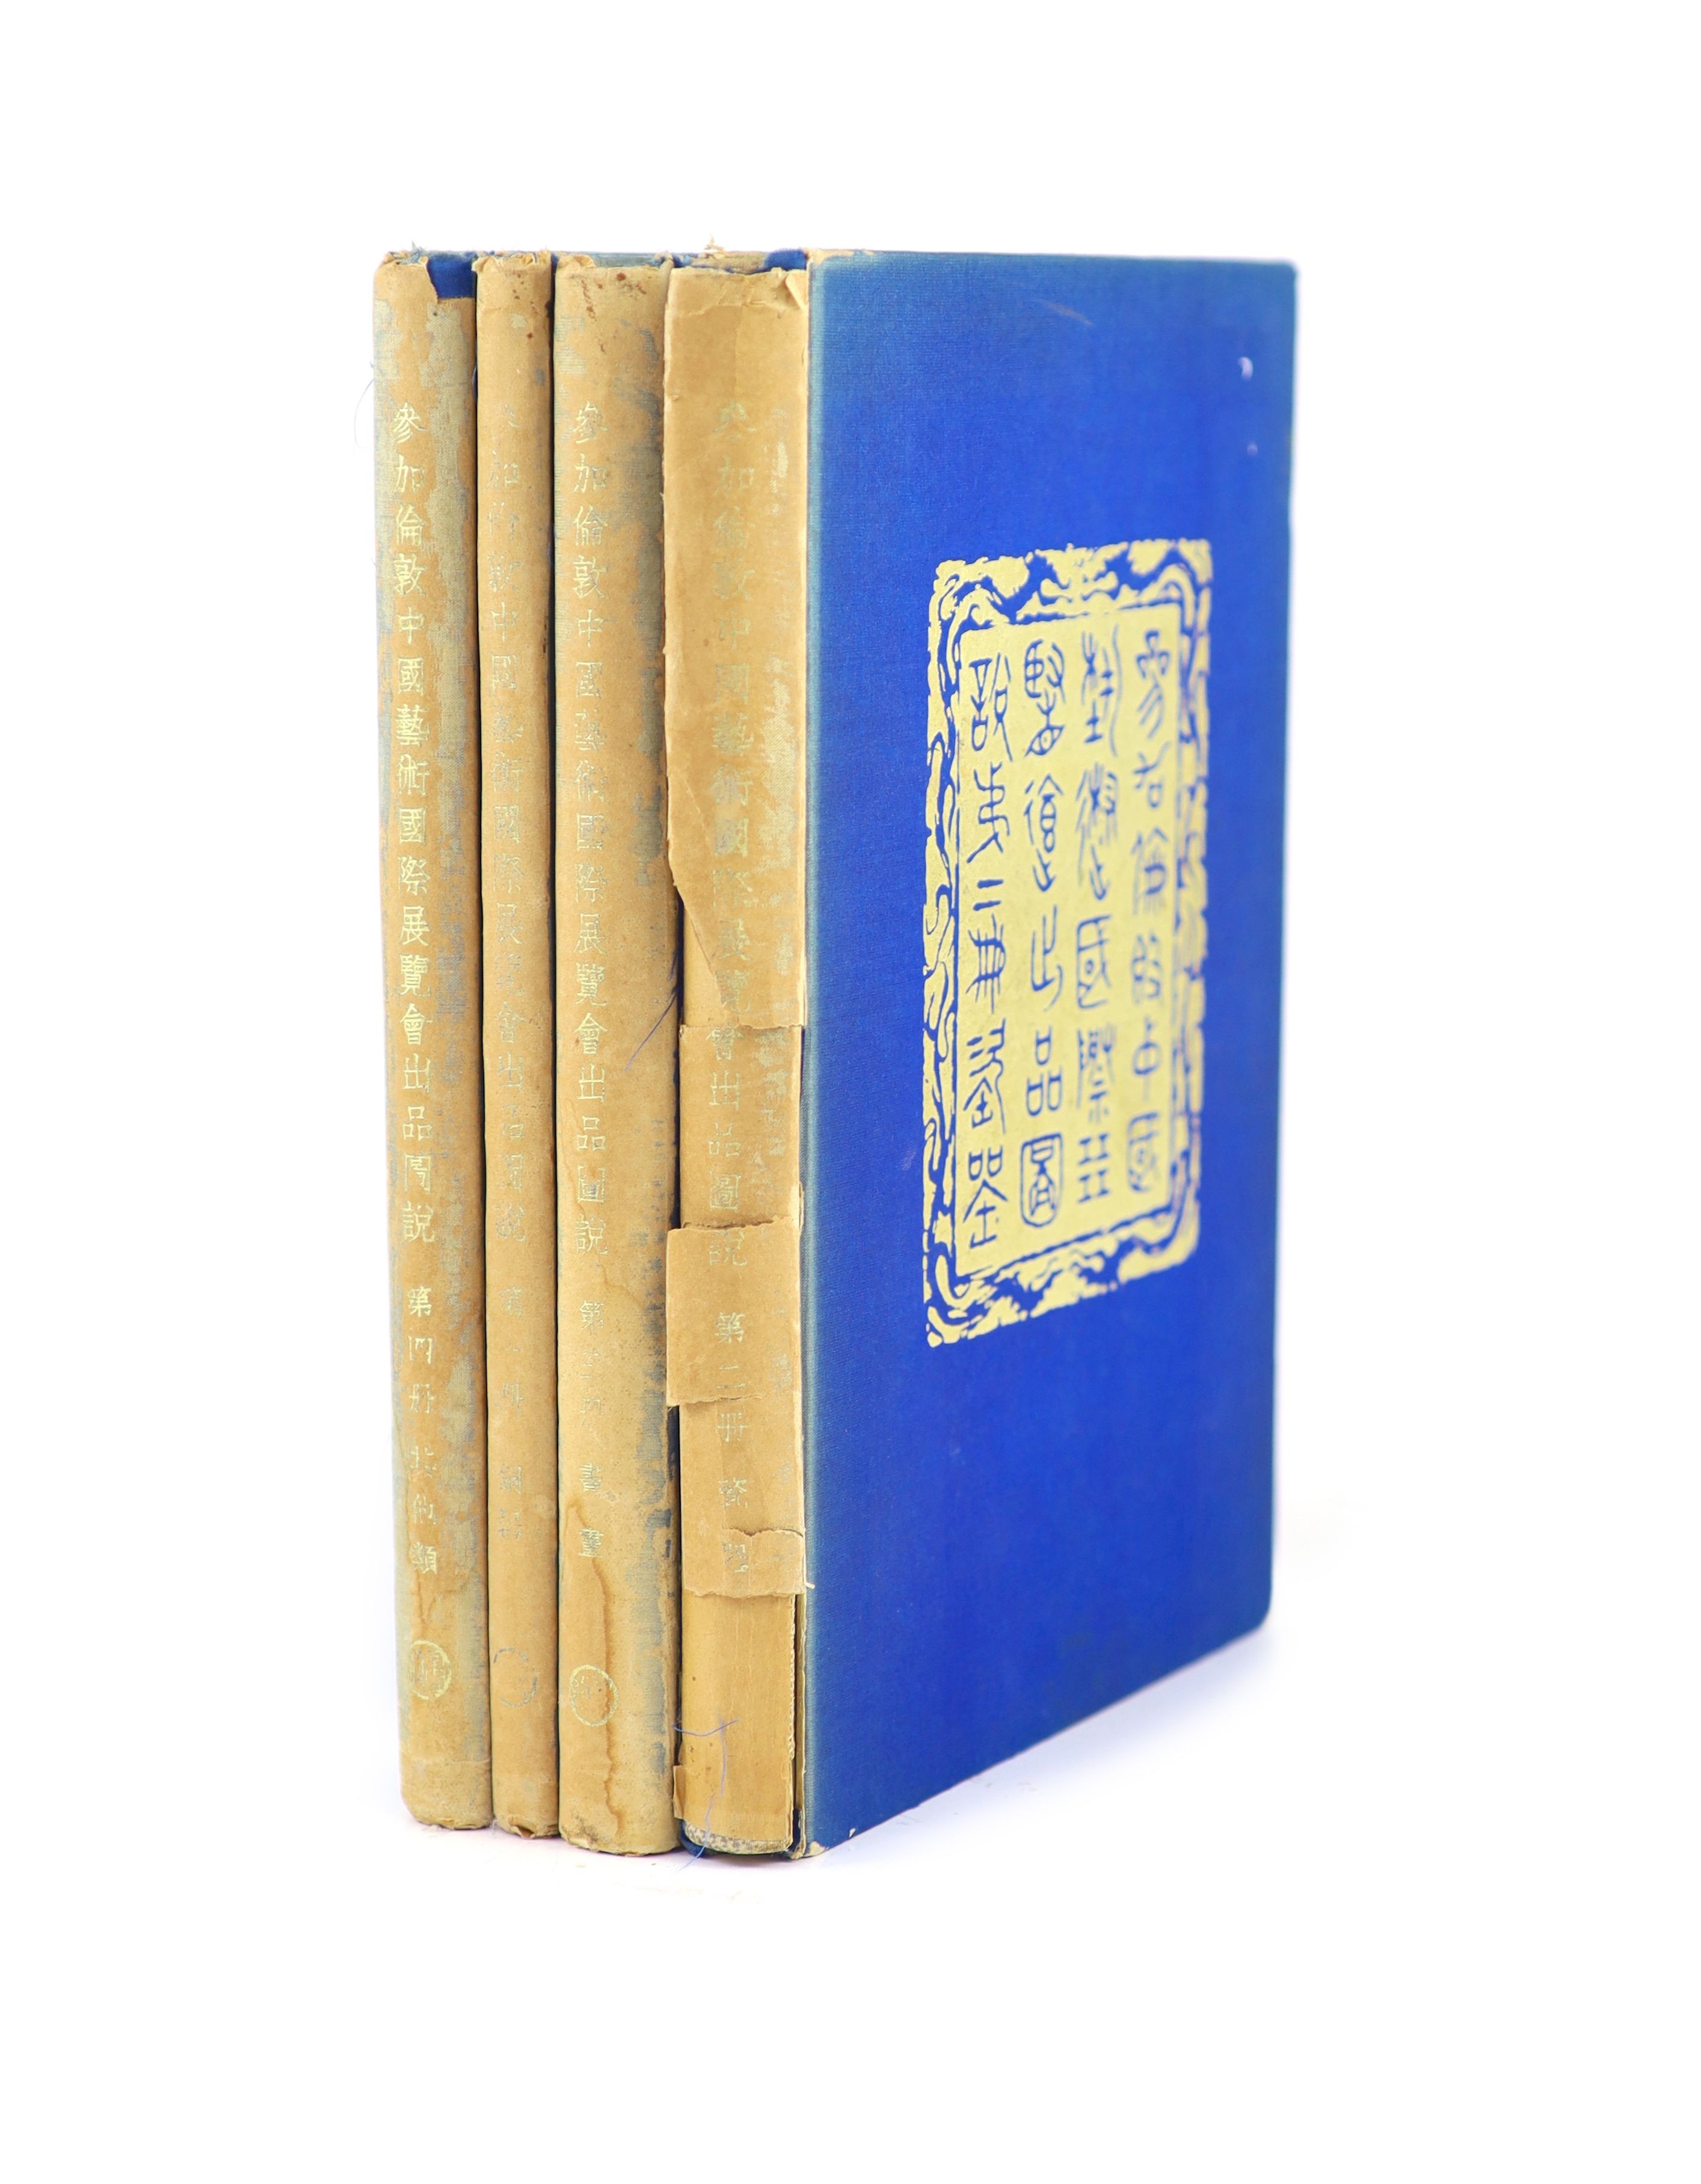 Illustrated catalogue of Chinese Government Exhibits For the International Exhibition of Chinese Art in London, 1935, four volumes, 27 x 19.5 cm